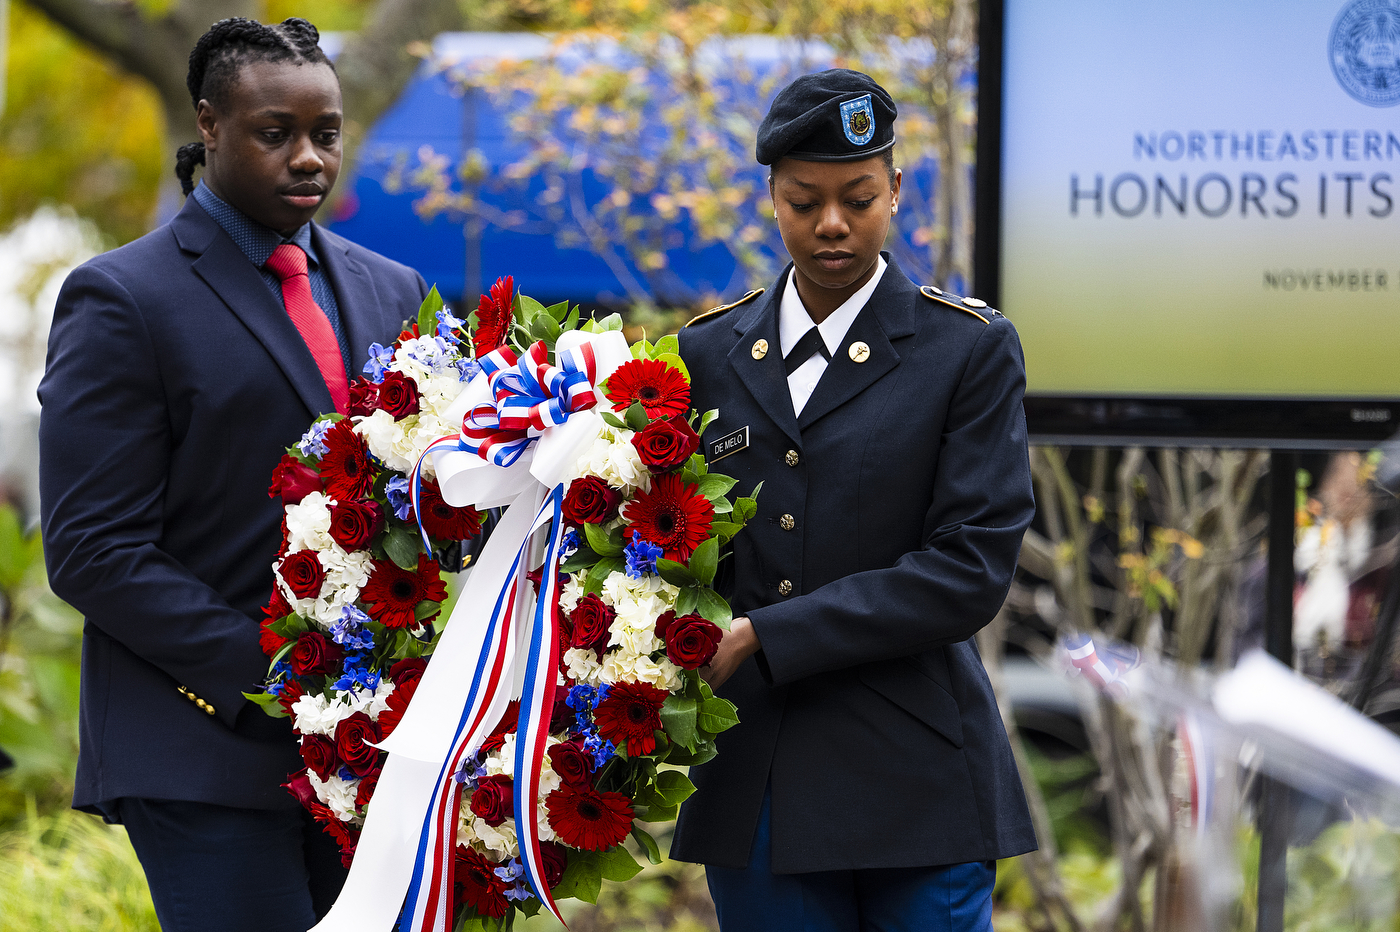 Two people placing a wreath at the Veterans Day ceremony